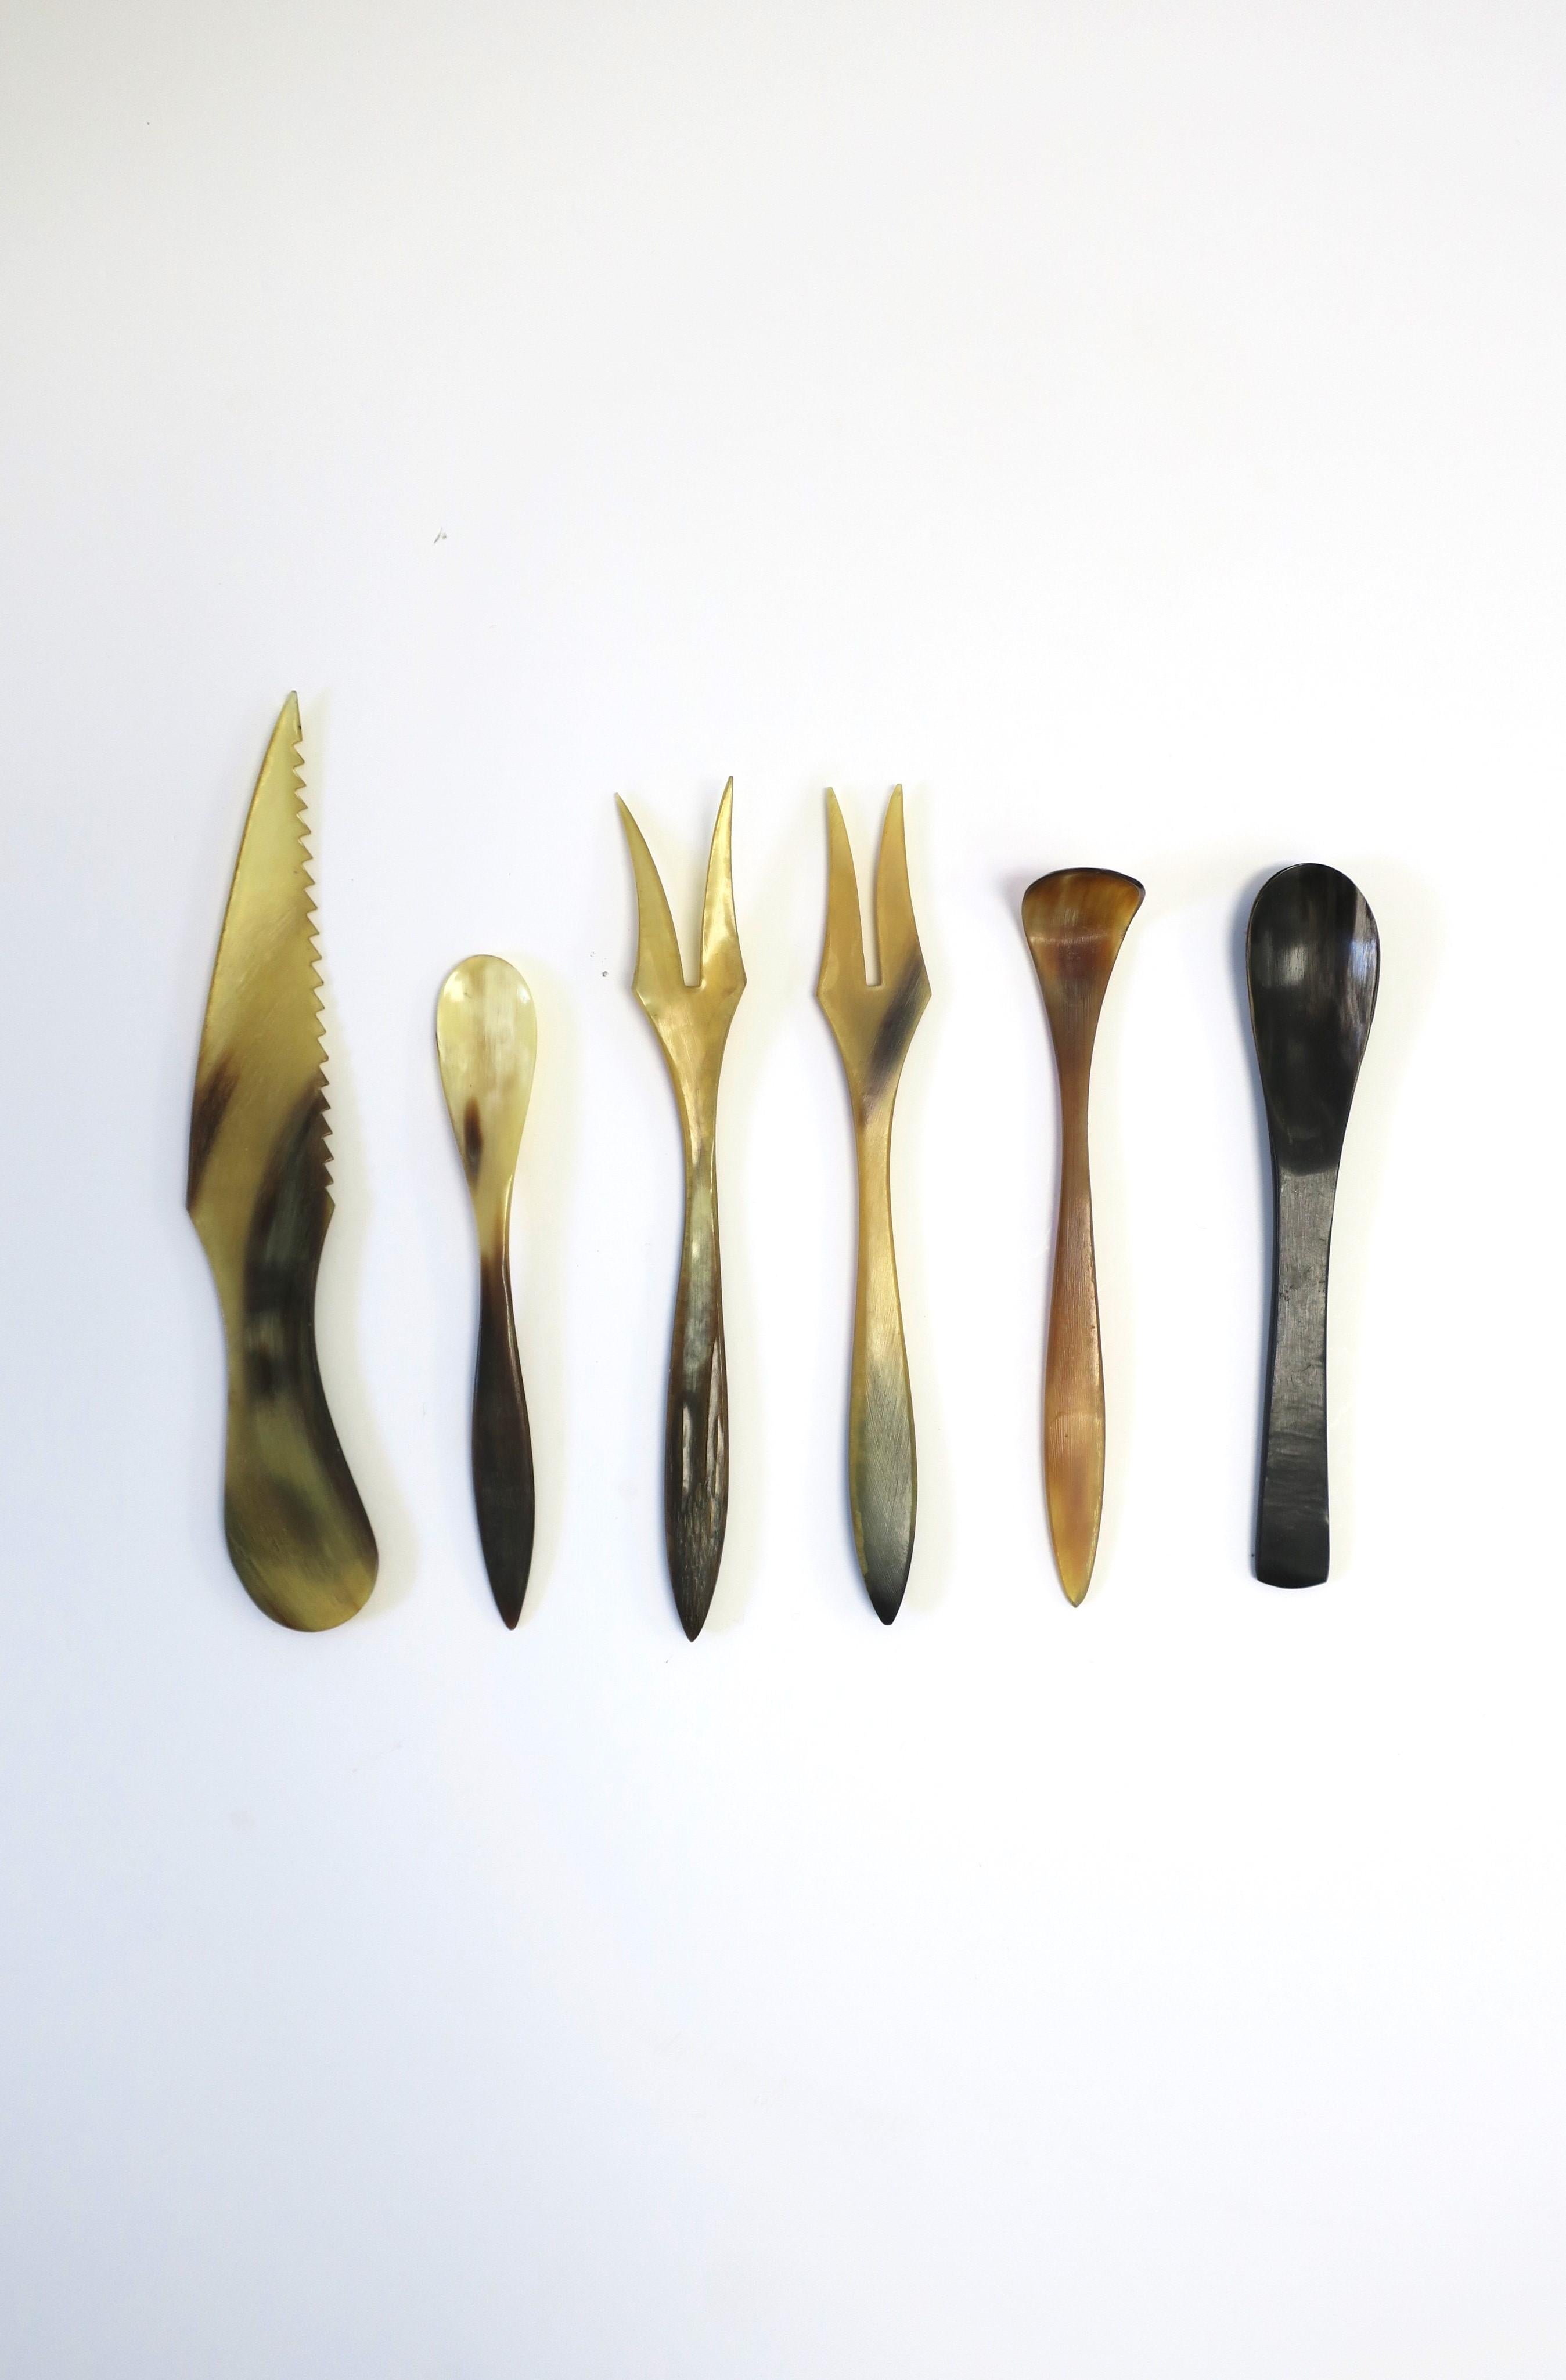 A set of six (6) Scandinavian Modern Minimalist horn appetizer utensils, circa late-20th century, Denmark. A great set for everyday use or entertaining. 

Dimensions: 
Largest is serrated knife on left measuring 1